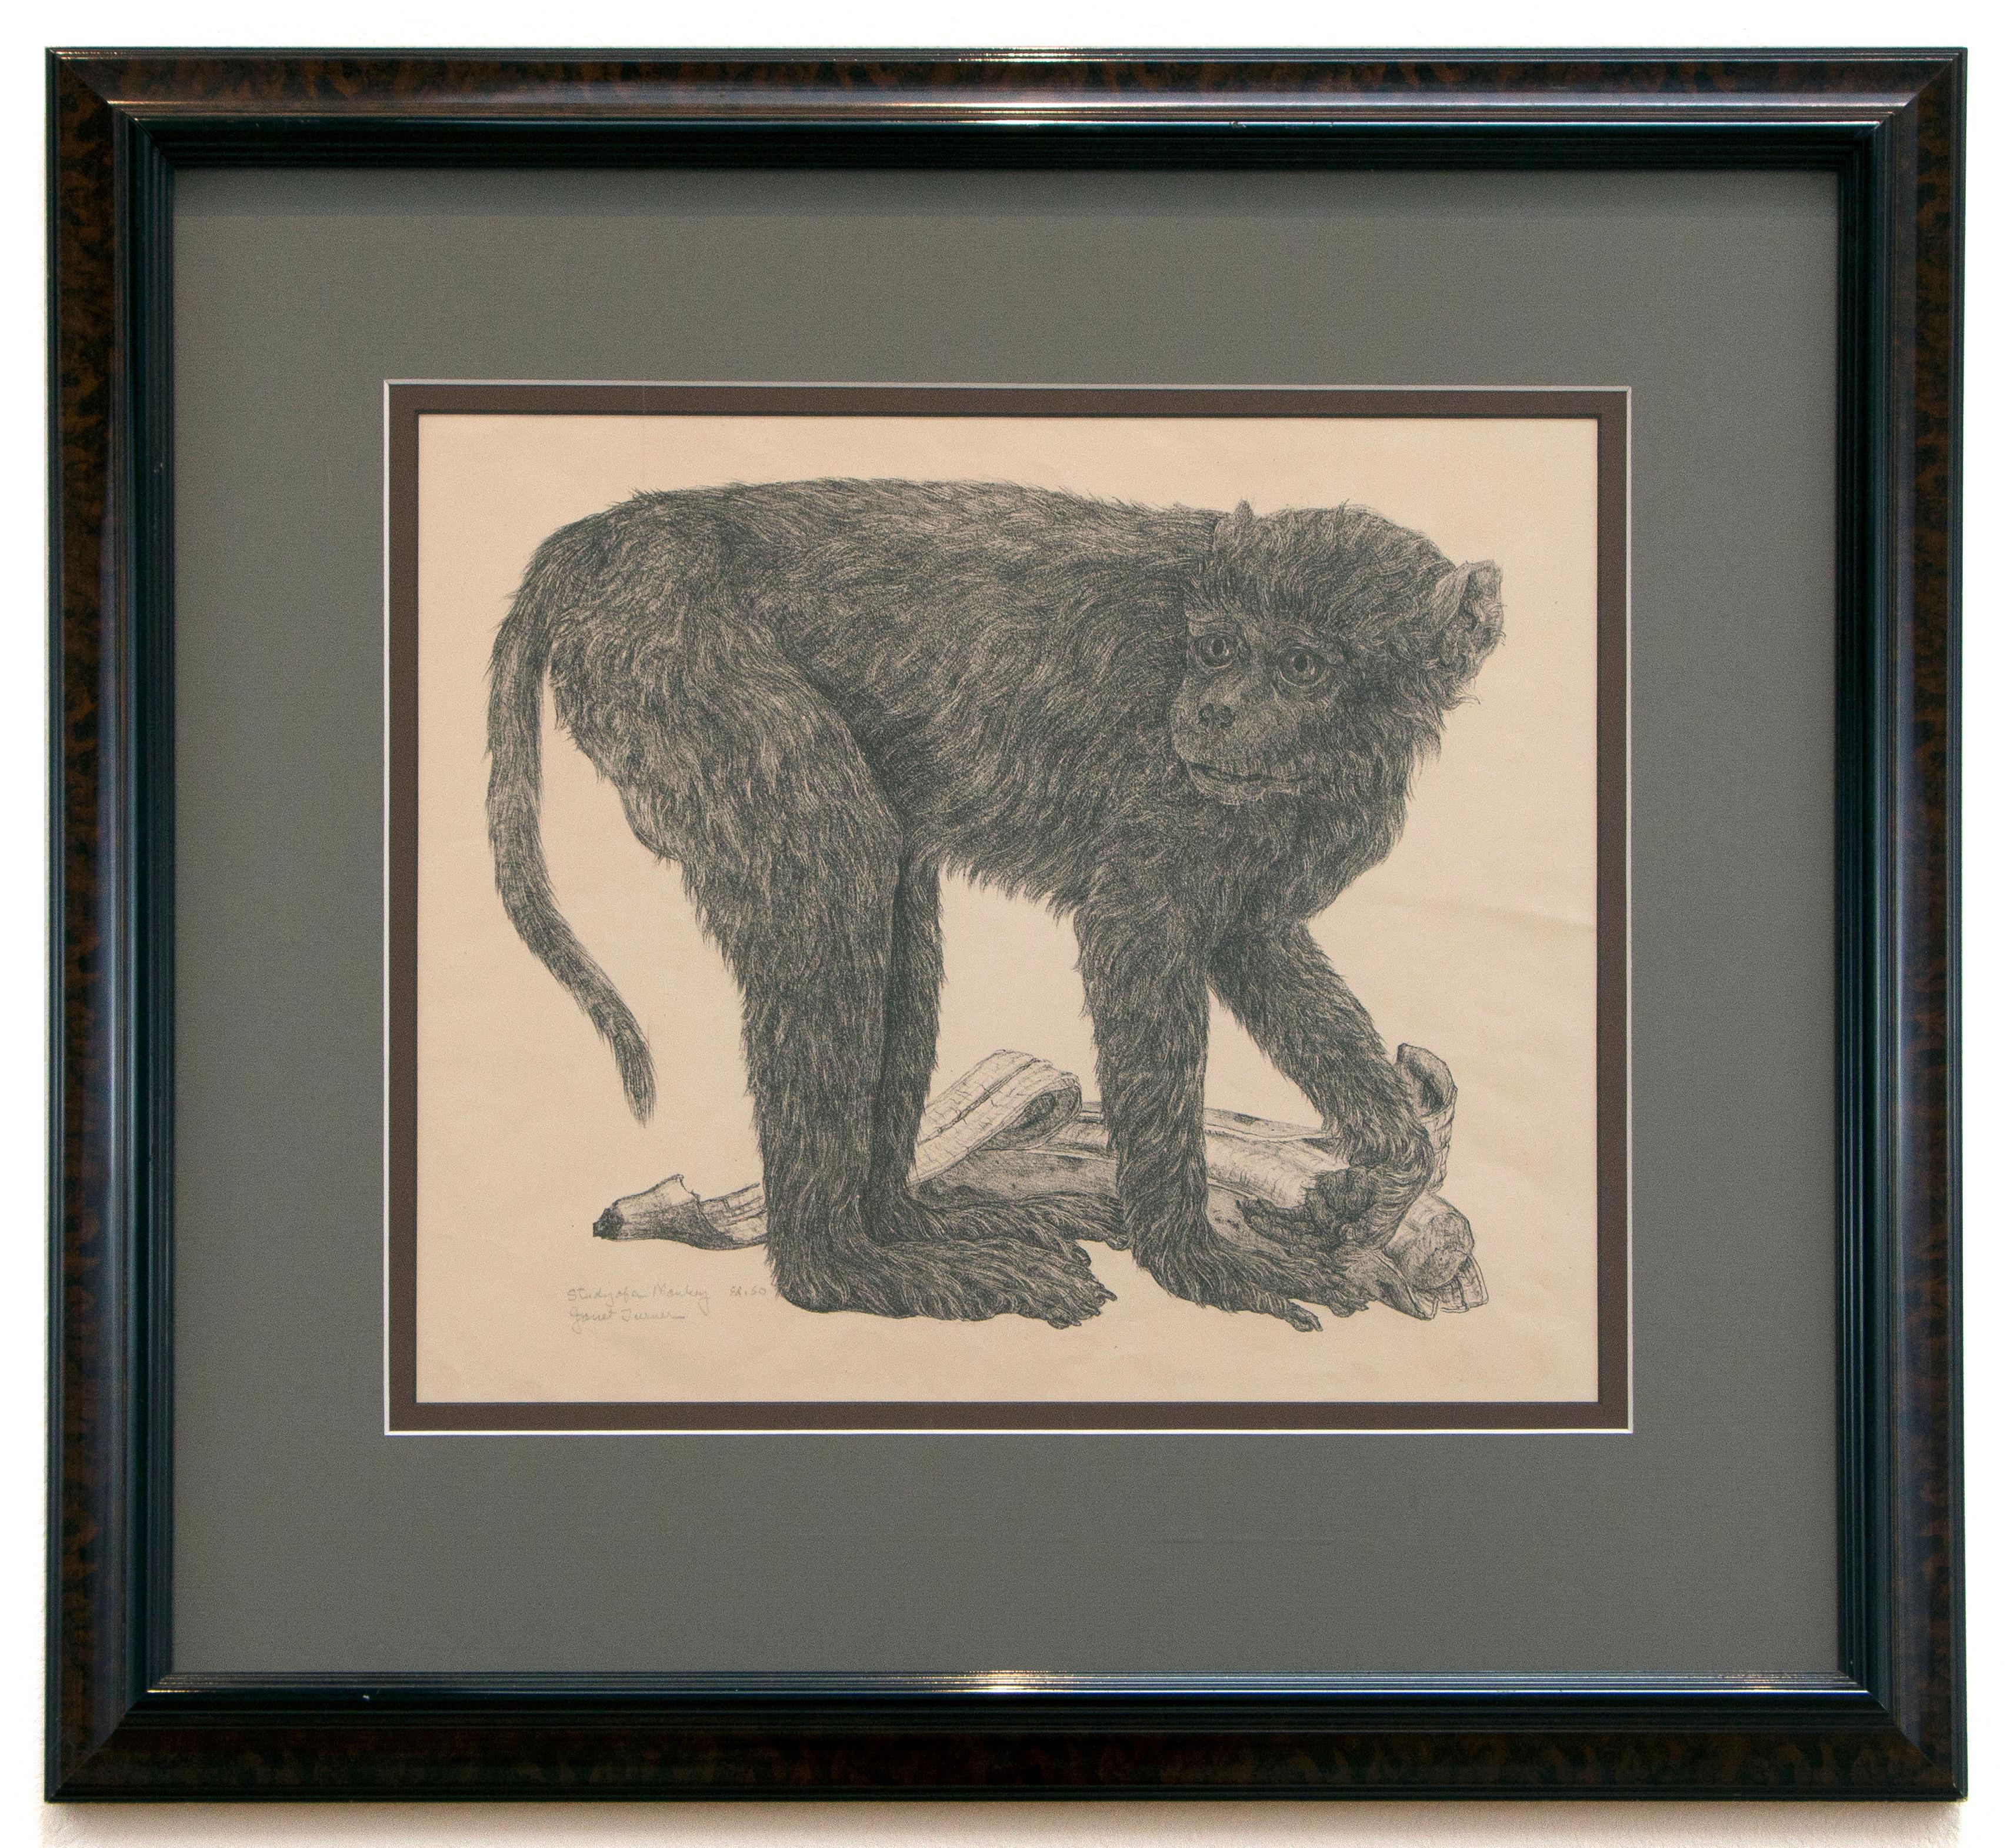 This is a paper lithograph of a monkey with a banana. It is rendered in shades of gray. 

Janet Turner (American, 1914-1988)
Study of a Monkey, 1959
Paper lithograph
12 x 14 inches
Signed and inscribed lower left: Study of a Monkey / Ed. 50 / Janet